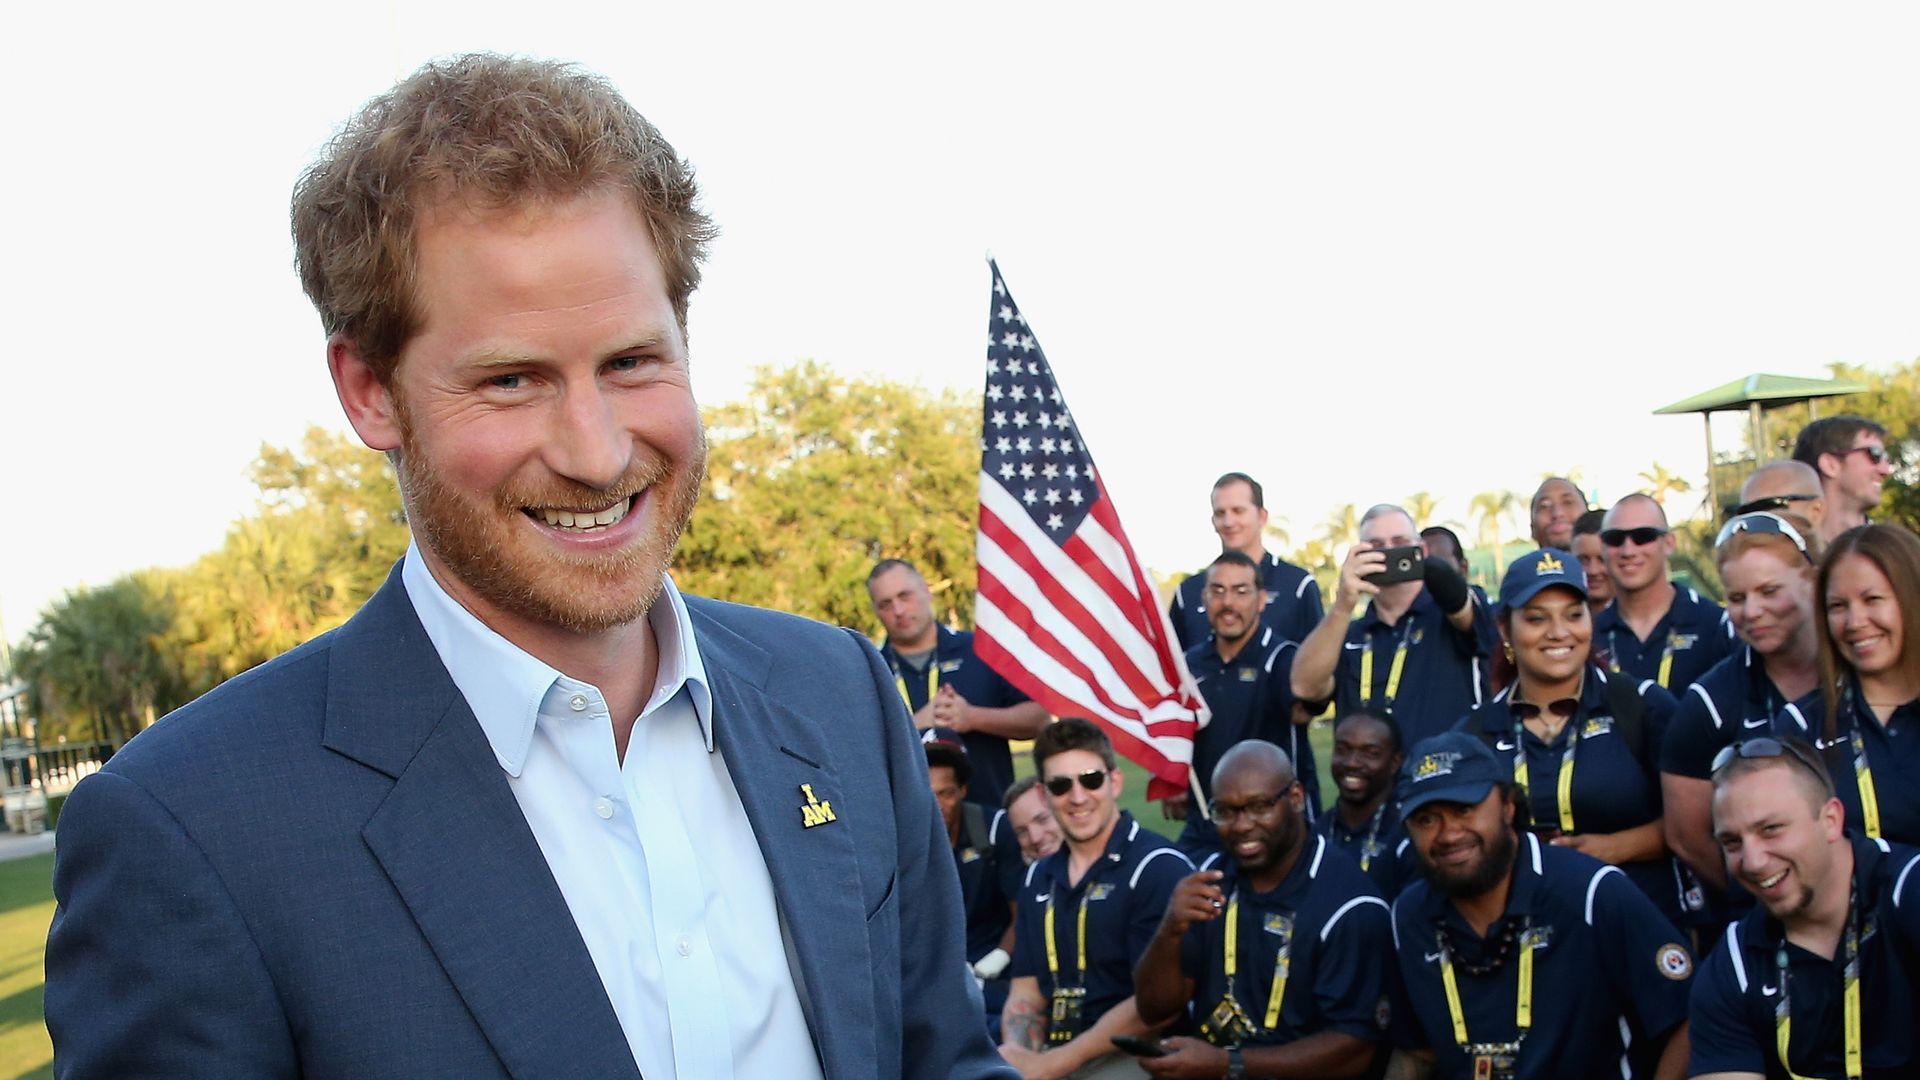 Prince Harry officially makes the US his home